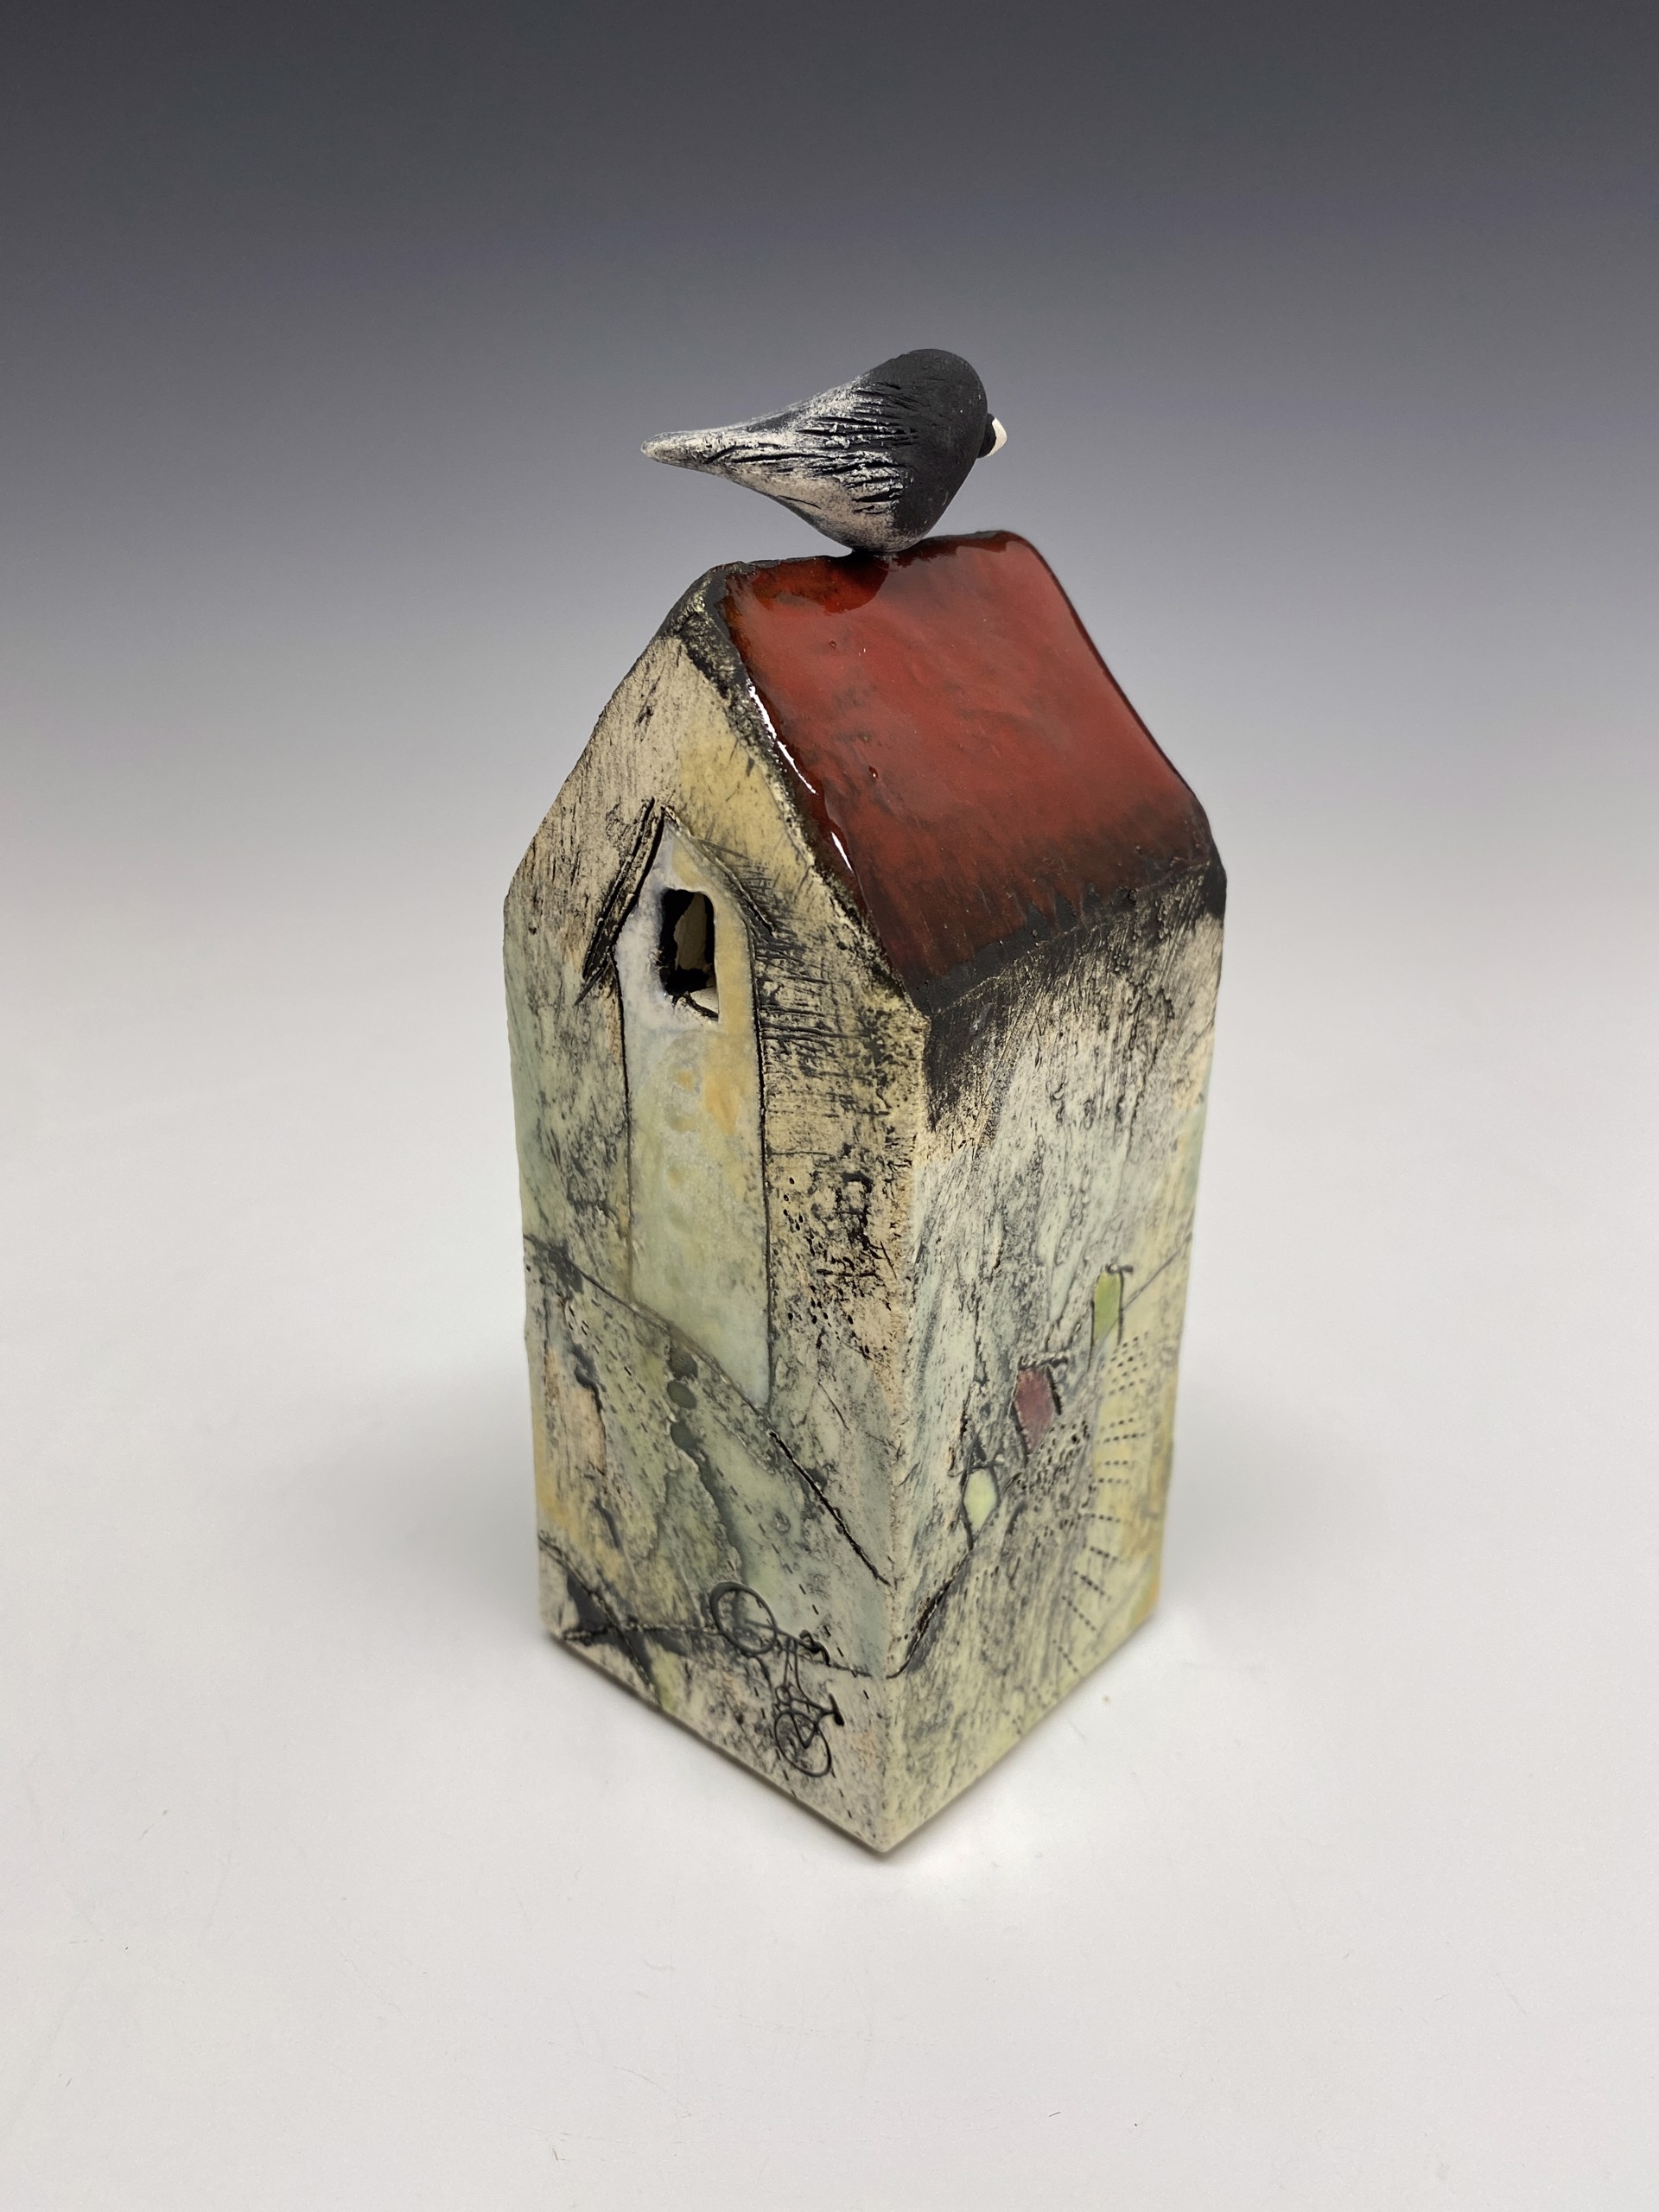 Tiny House with Bird #31 by Karen Abel